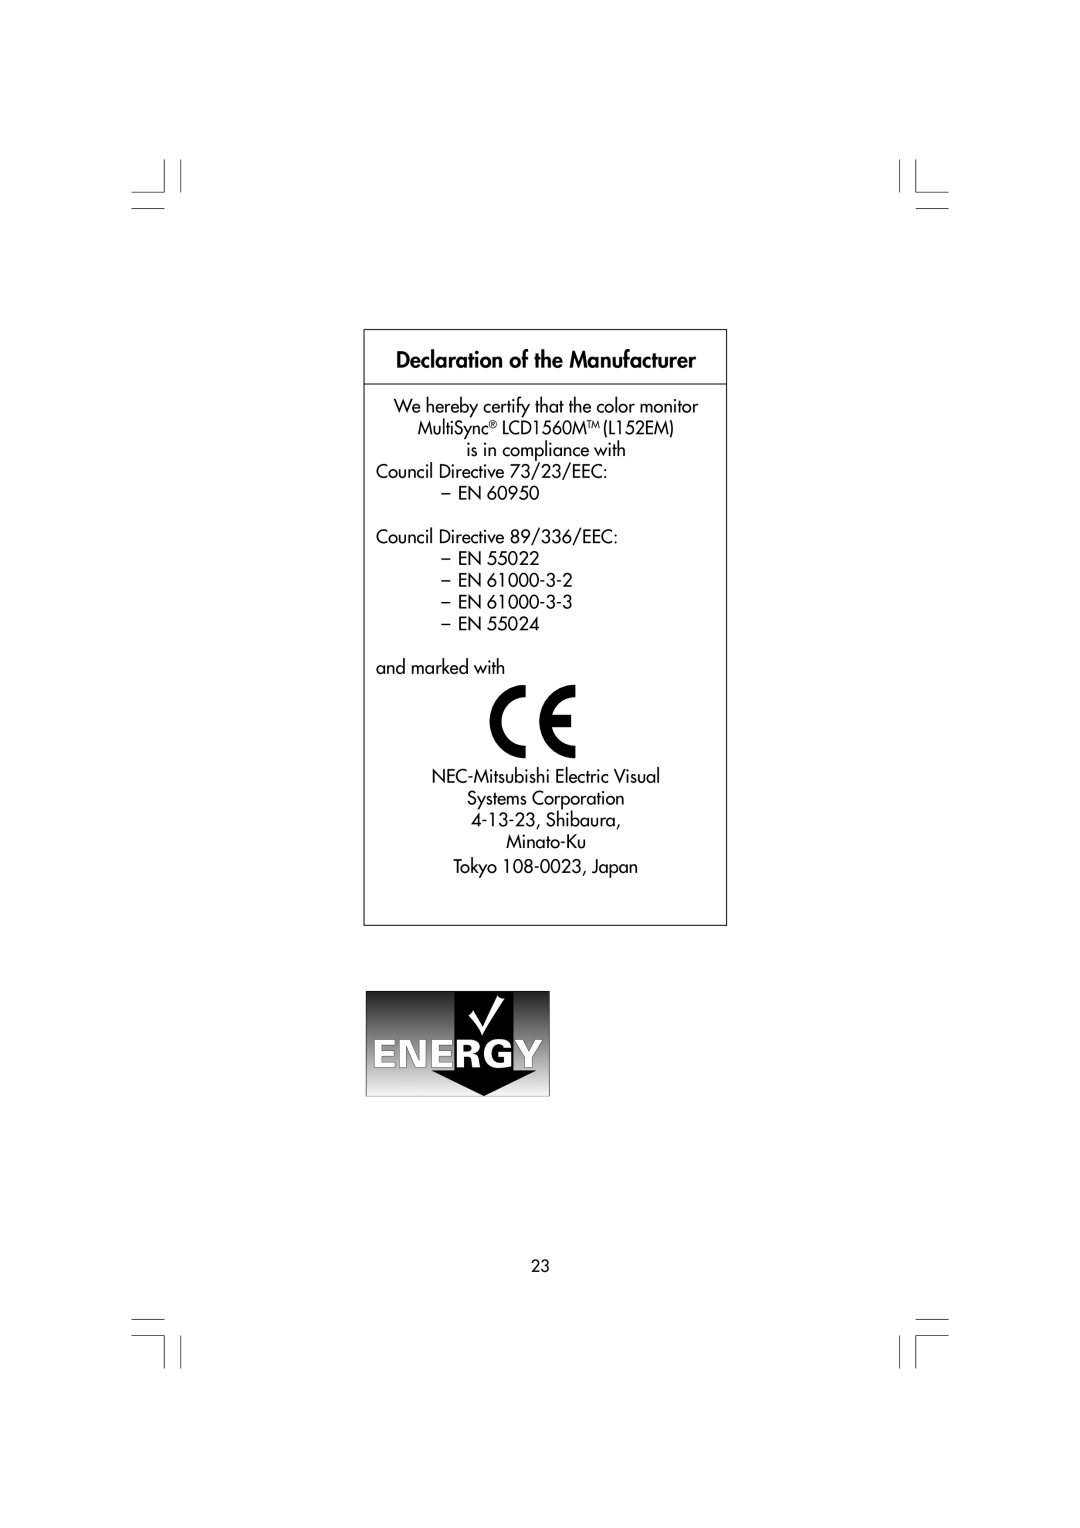 Mitsubishi Electronics LCD1560M Declaration of the Manufacturer, is in compliance with Council Directive 73/23/EEC EN 